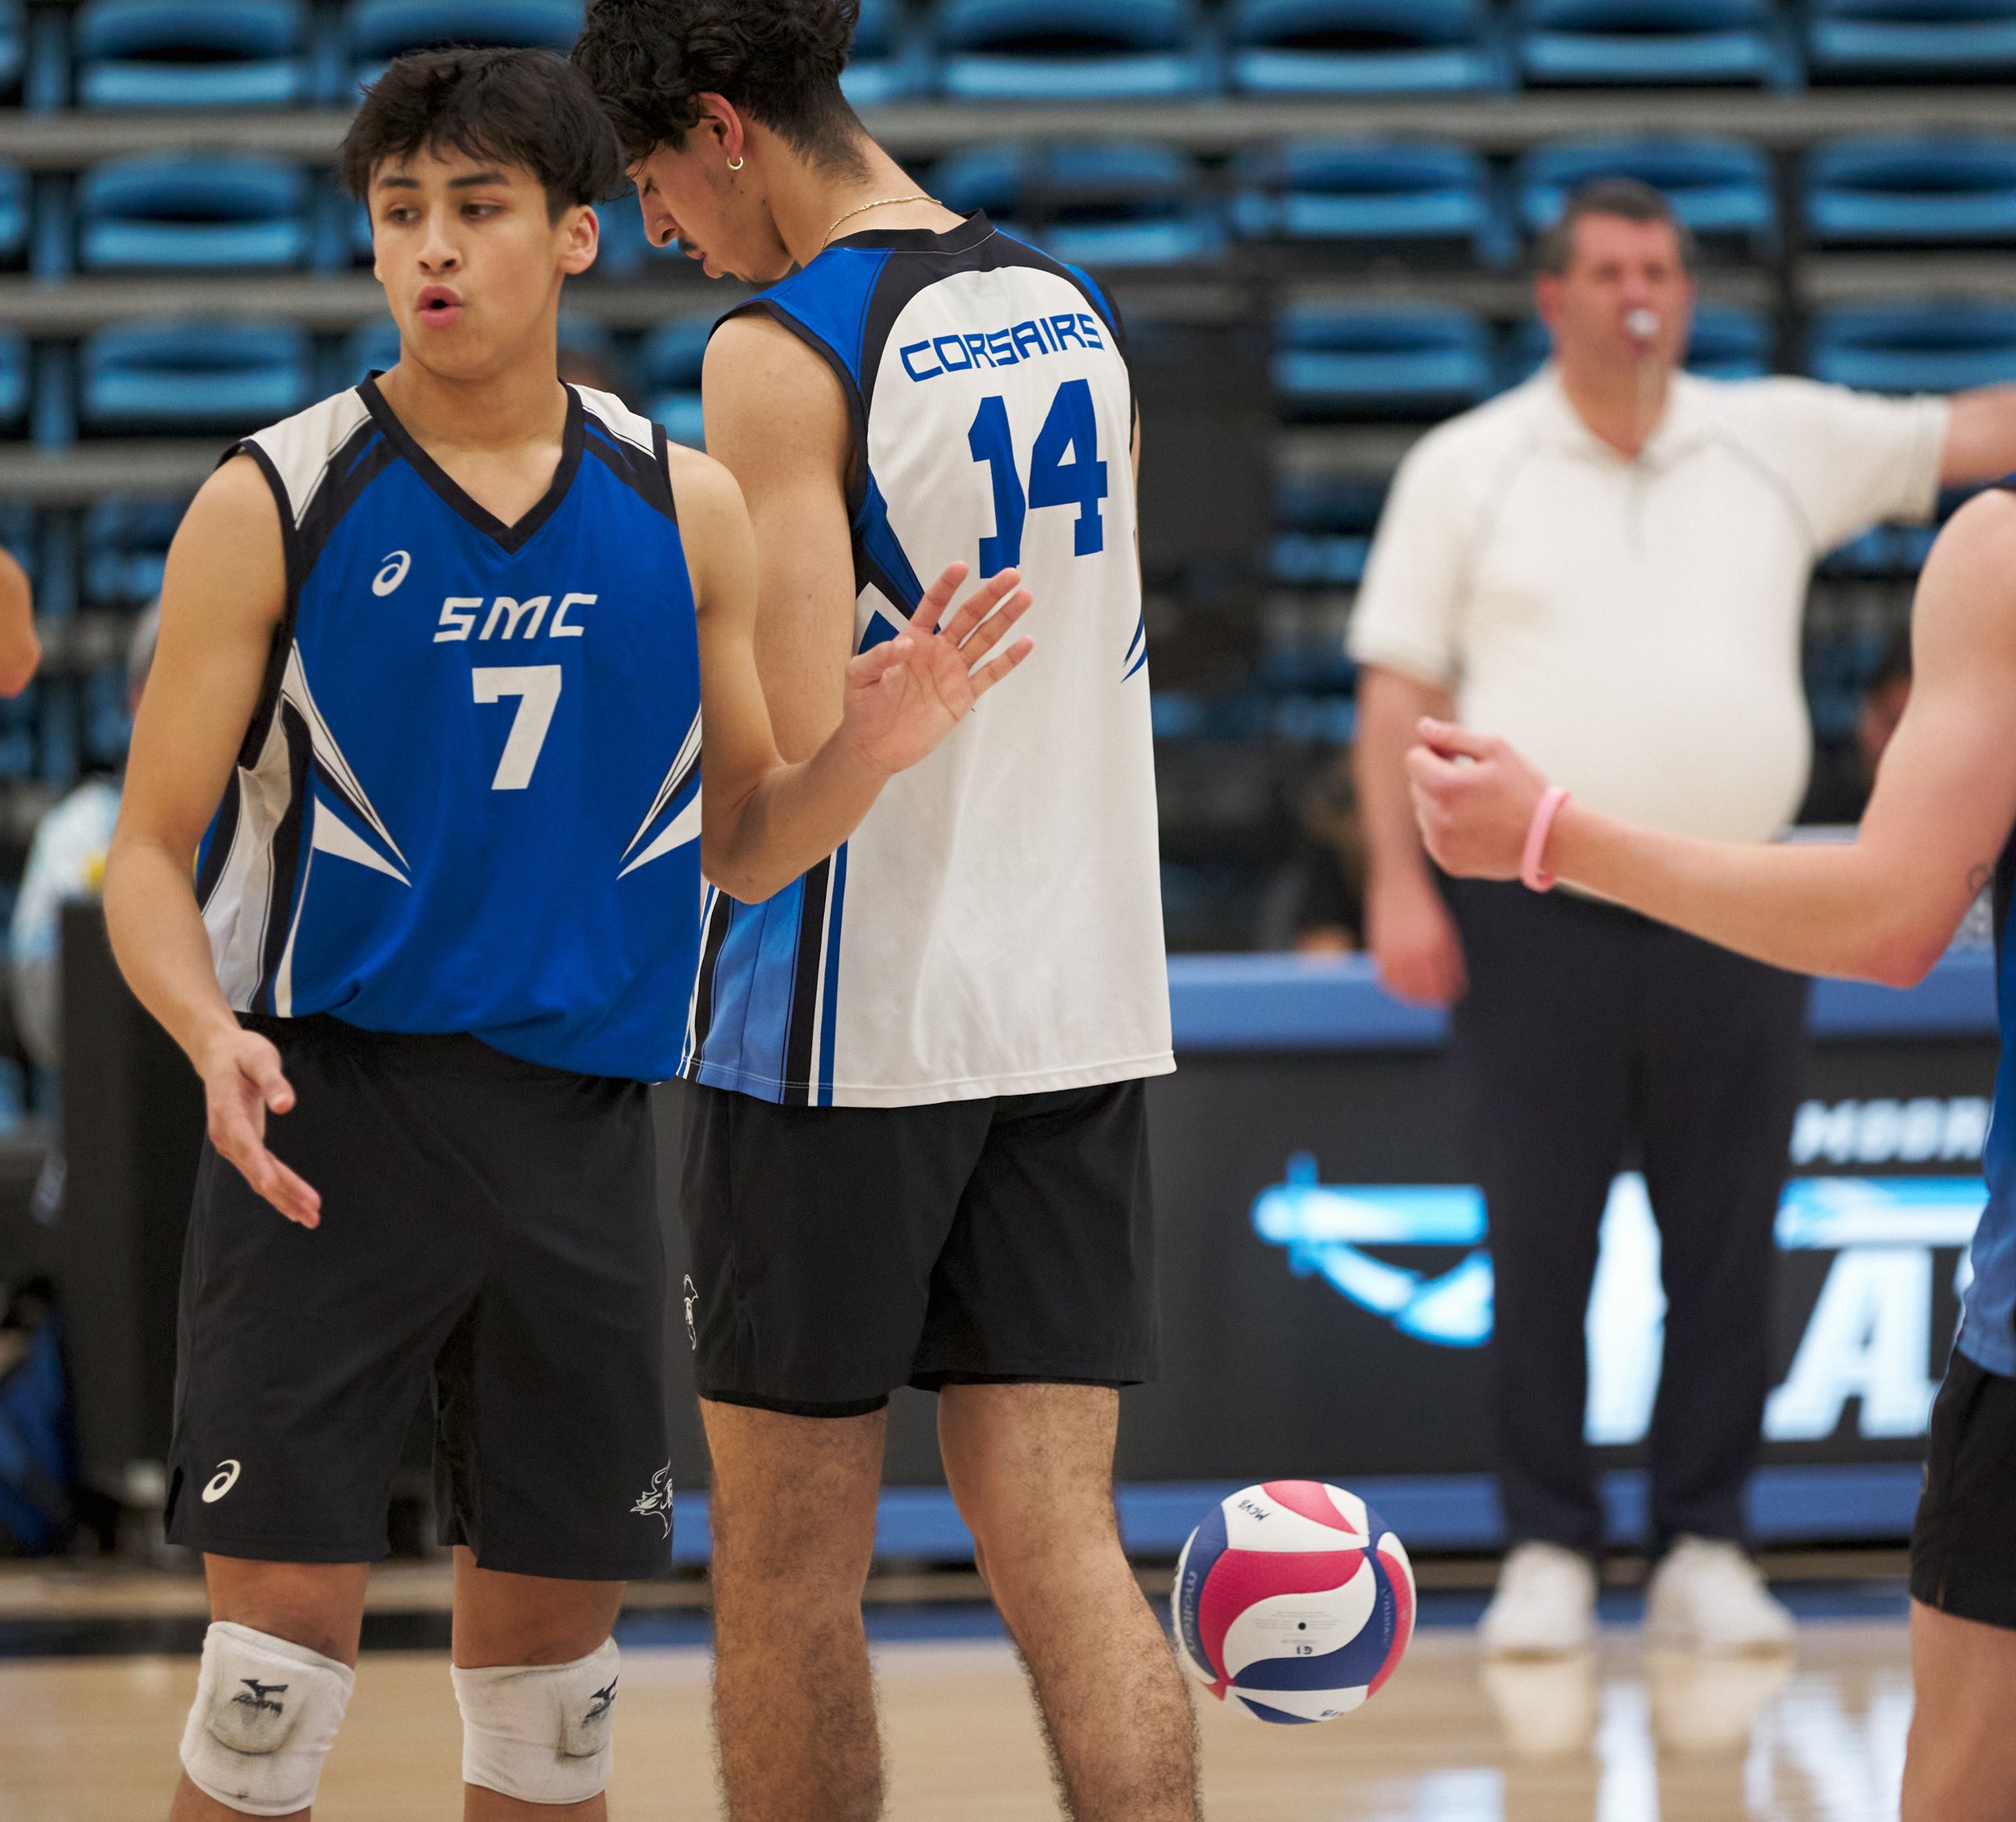  Santa Monica College Corsairs' Javier Castillo and Luis Garzon react to losing a point to the Moorpark  College Raiders during the men's volleyball match on Friday, March 17, 2023, at Moorpark College's Gymnasium in Moorpark, Calif. The Corsairs los